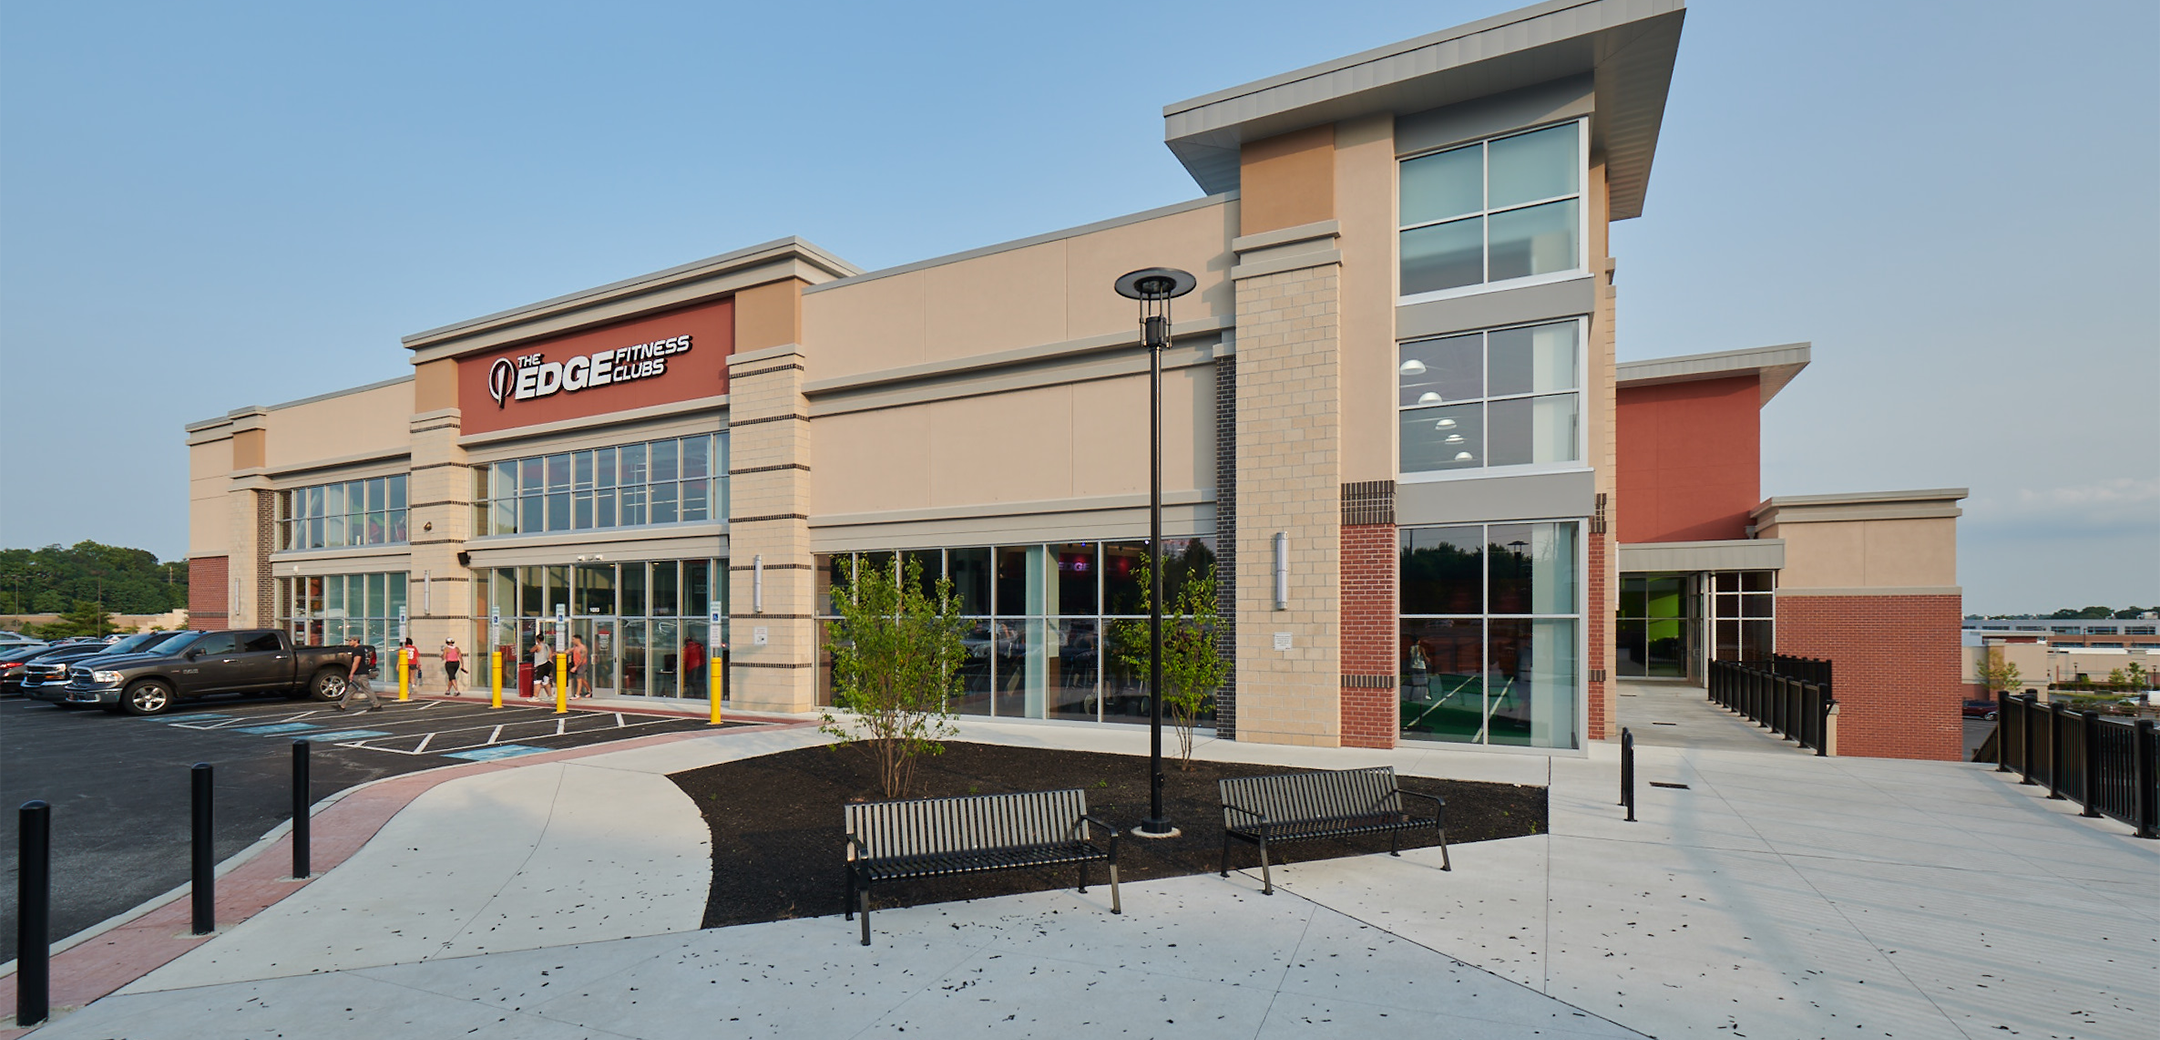 An exterior view of the Promenade at Granite Run building showcasing the glass storefront, entrance, floor to ceiling edge design, parking lot and a large sidewalk with benches in the foreground.